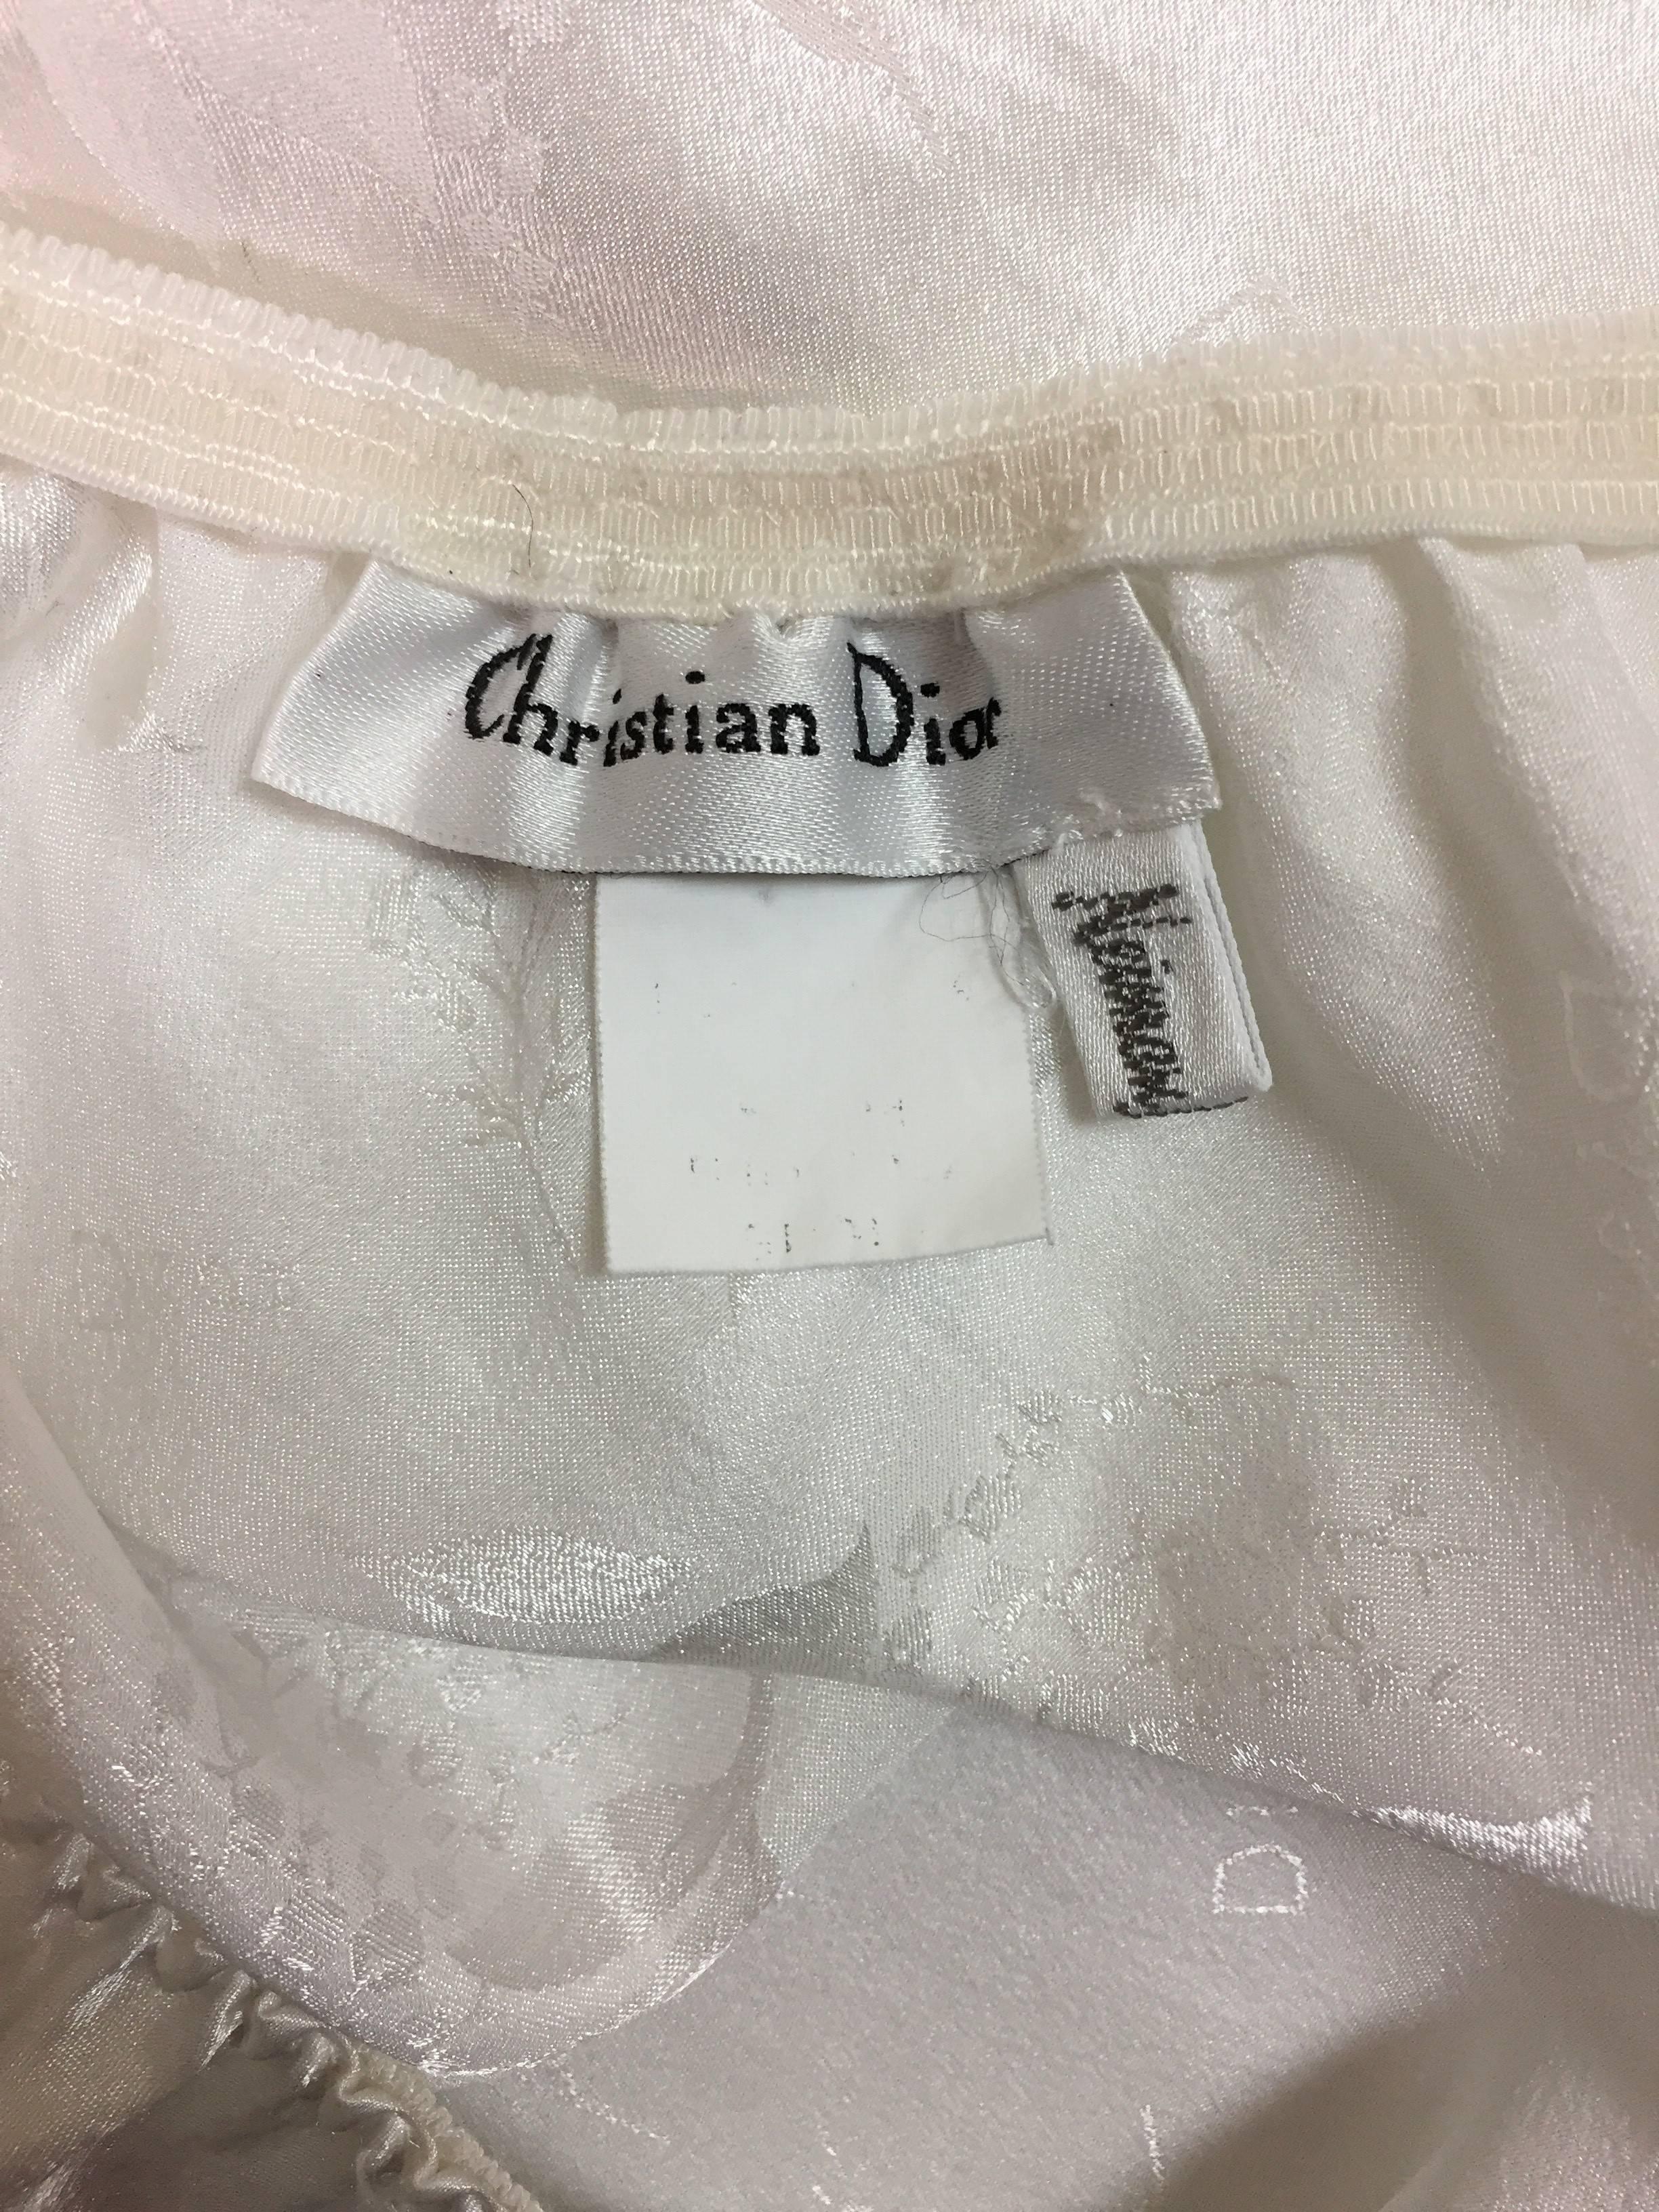 DESIGNER: 1990's Christian Dior

Please contact for more information and/or photos.

CONDITION: Good- no holes or stains, light wear to the end of the lace trim, please see last photo. 

MATERIAL: unknown

COUNTRY MADE: USA

SIZE: Unknown- can fit